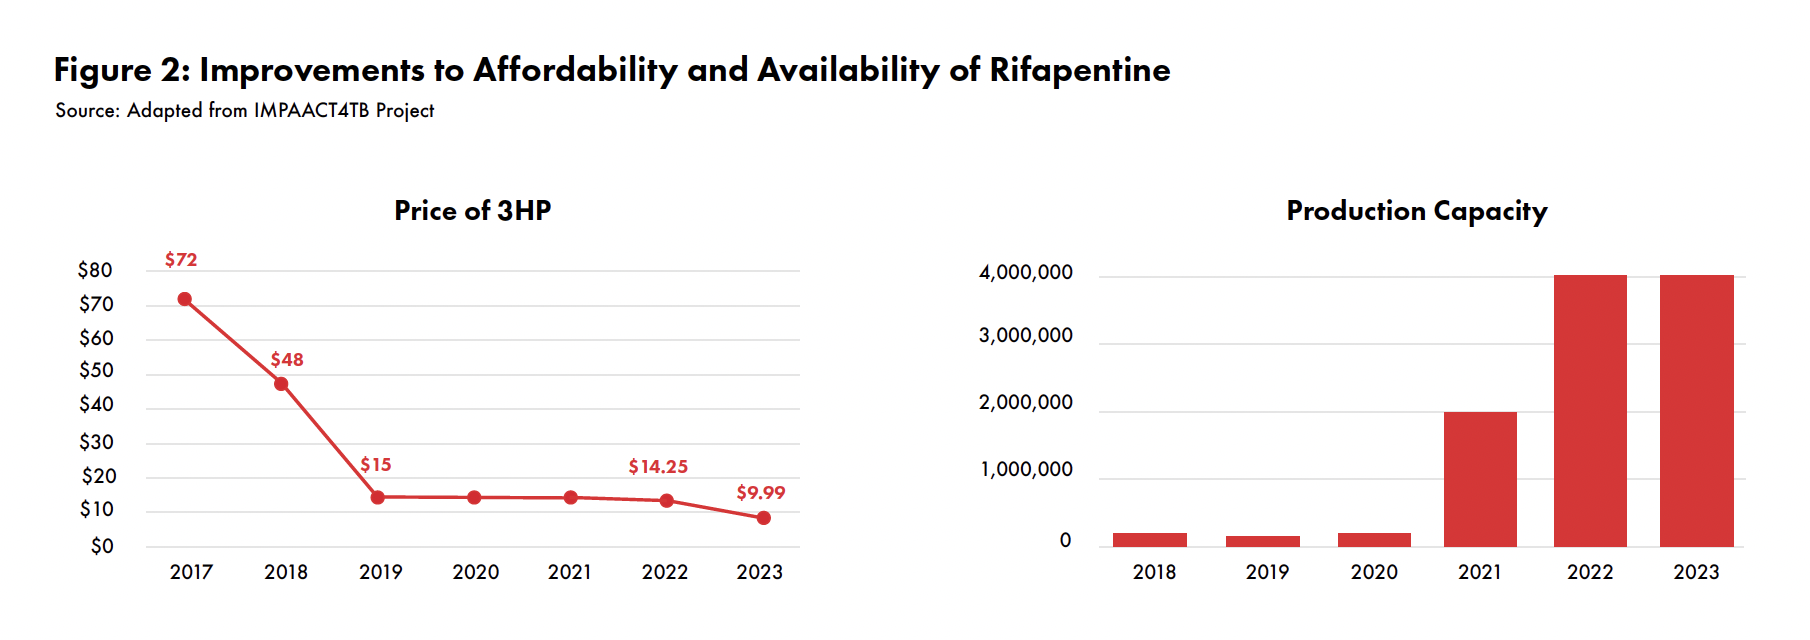 Graphic showing Improvements to Affordability and Availability of Rifapentine: Price of 3HP and Production Capacity